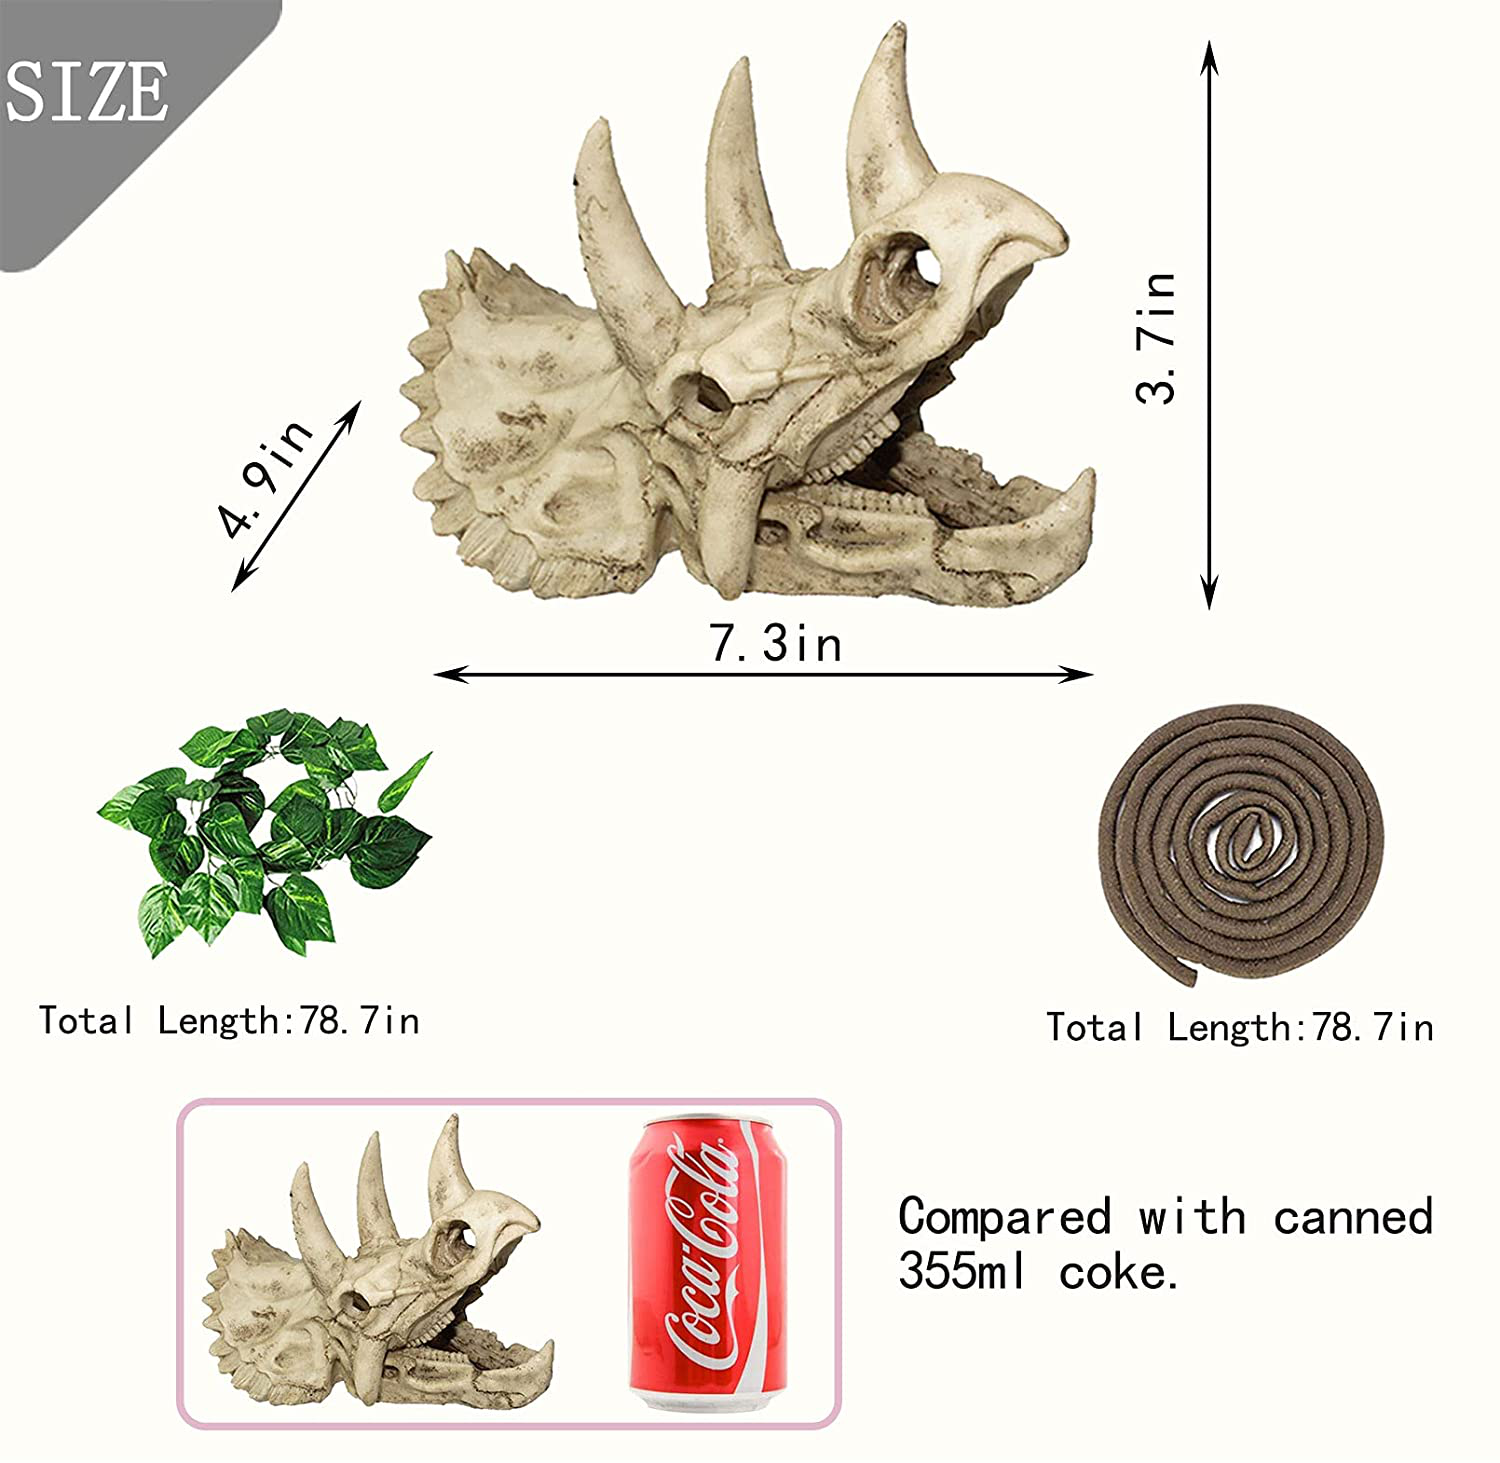 Tfwadmx Bearded Dragon Tank Accessories Resin Dinosaur Triceratops Skull Skeleton Reptiles Hideouts Cave Vines Leaves Aquarium Decorations for Lizards,Chameleon,Snake,Spider,Gecko